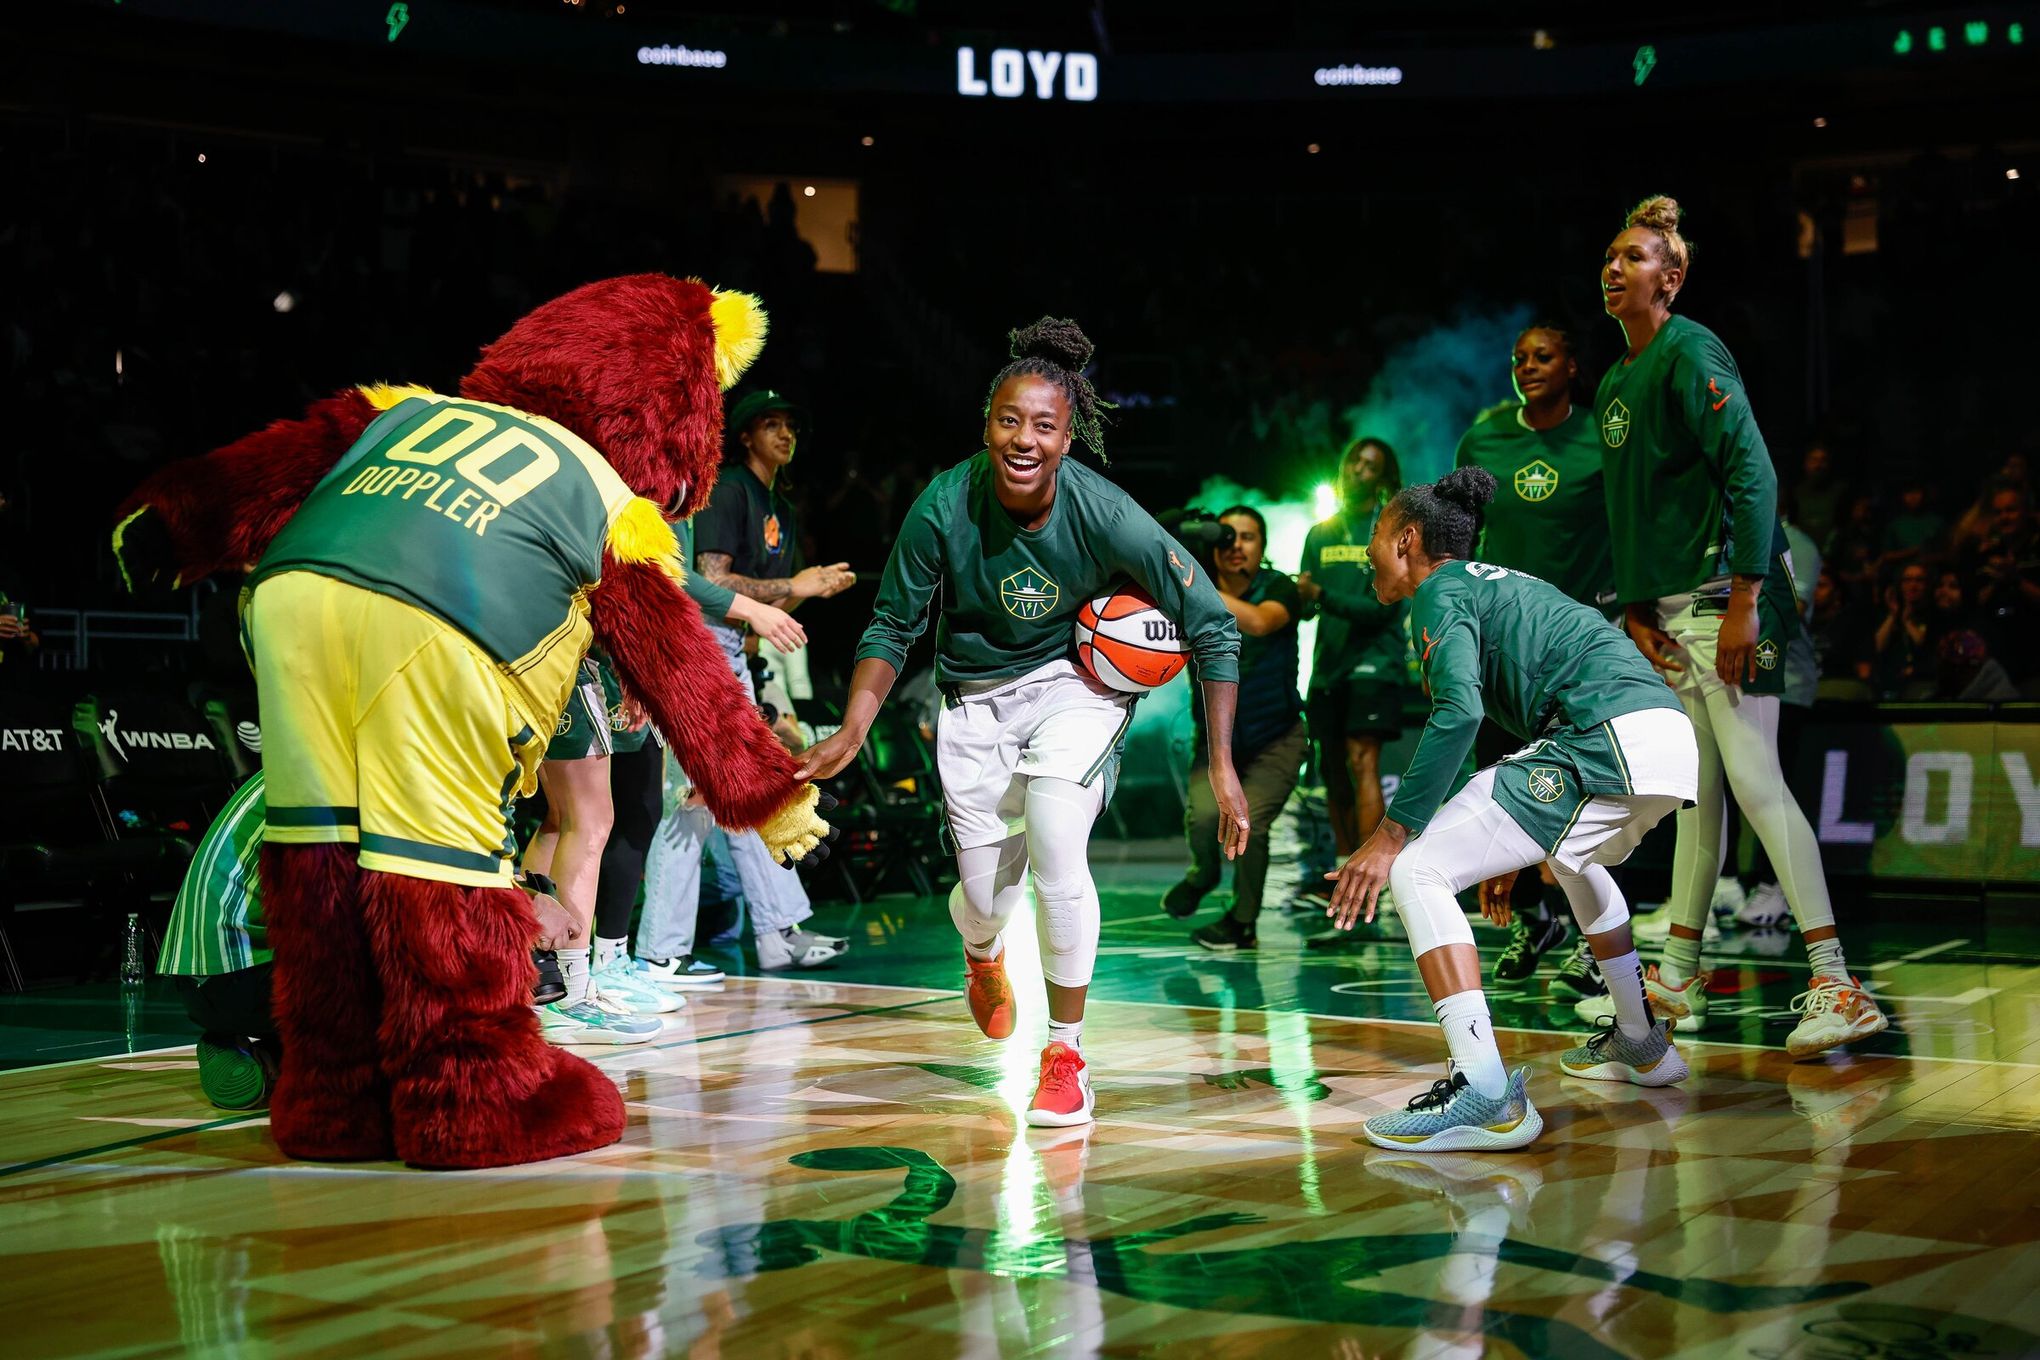 Google signs deal with WNBA to present league's playoffs